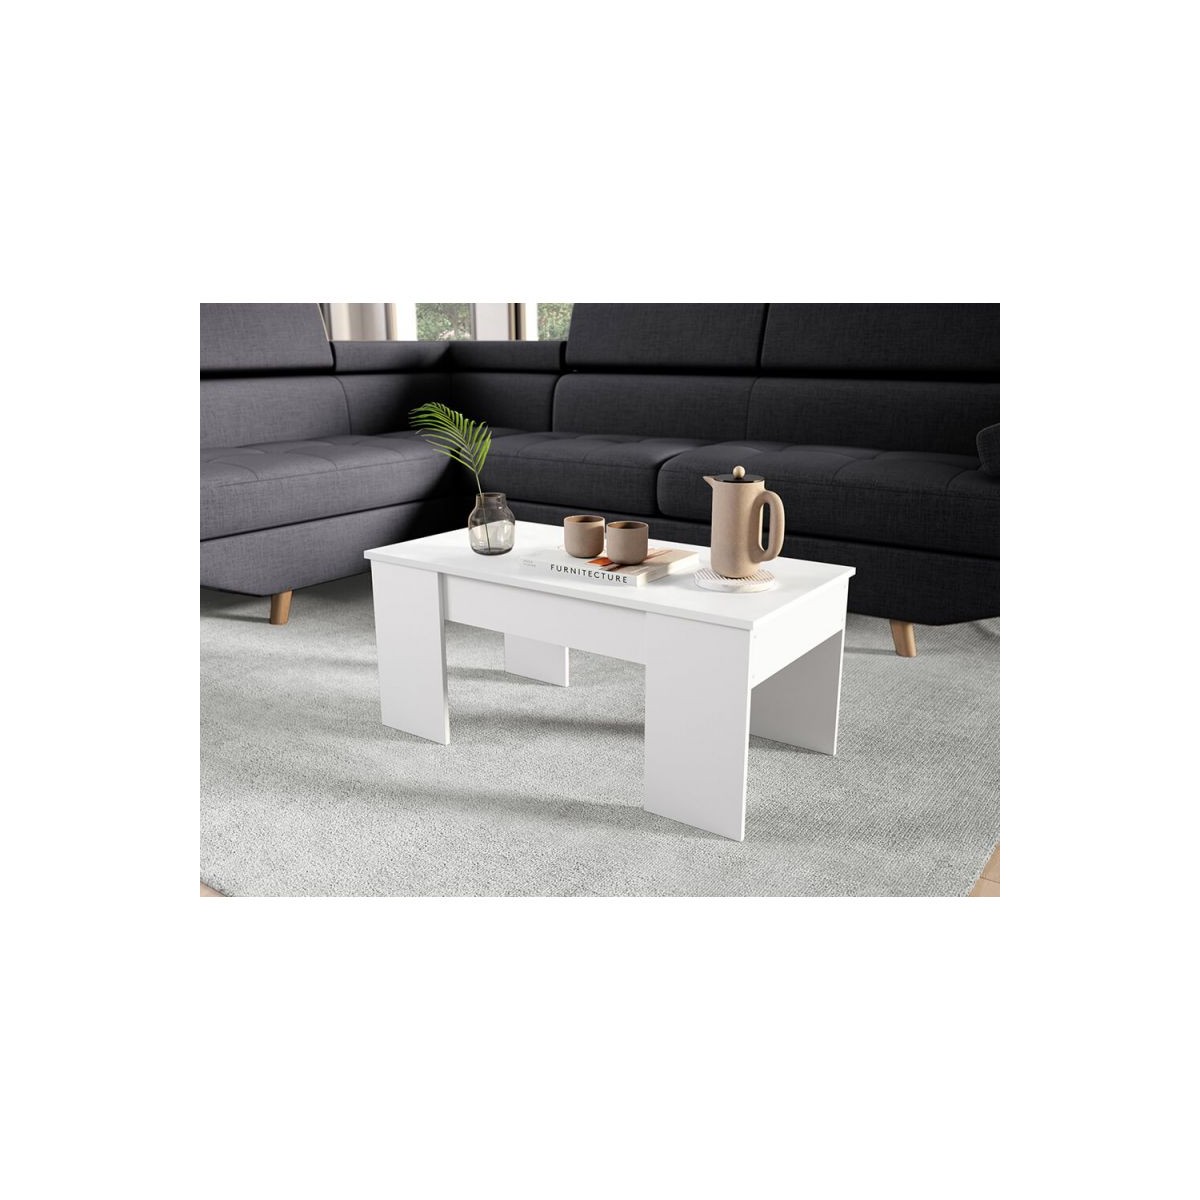 Coffee Table Living Room Table Side Table 70x70 cm Living Room Charcoal White New 